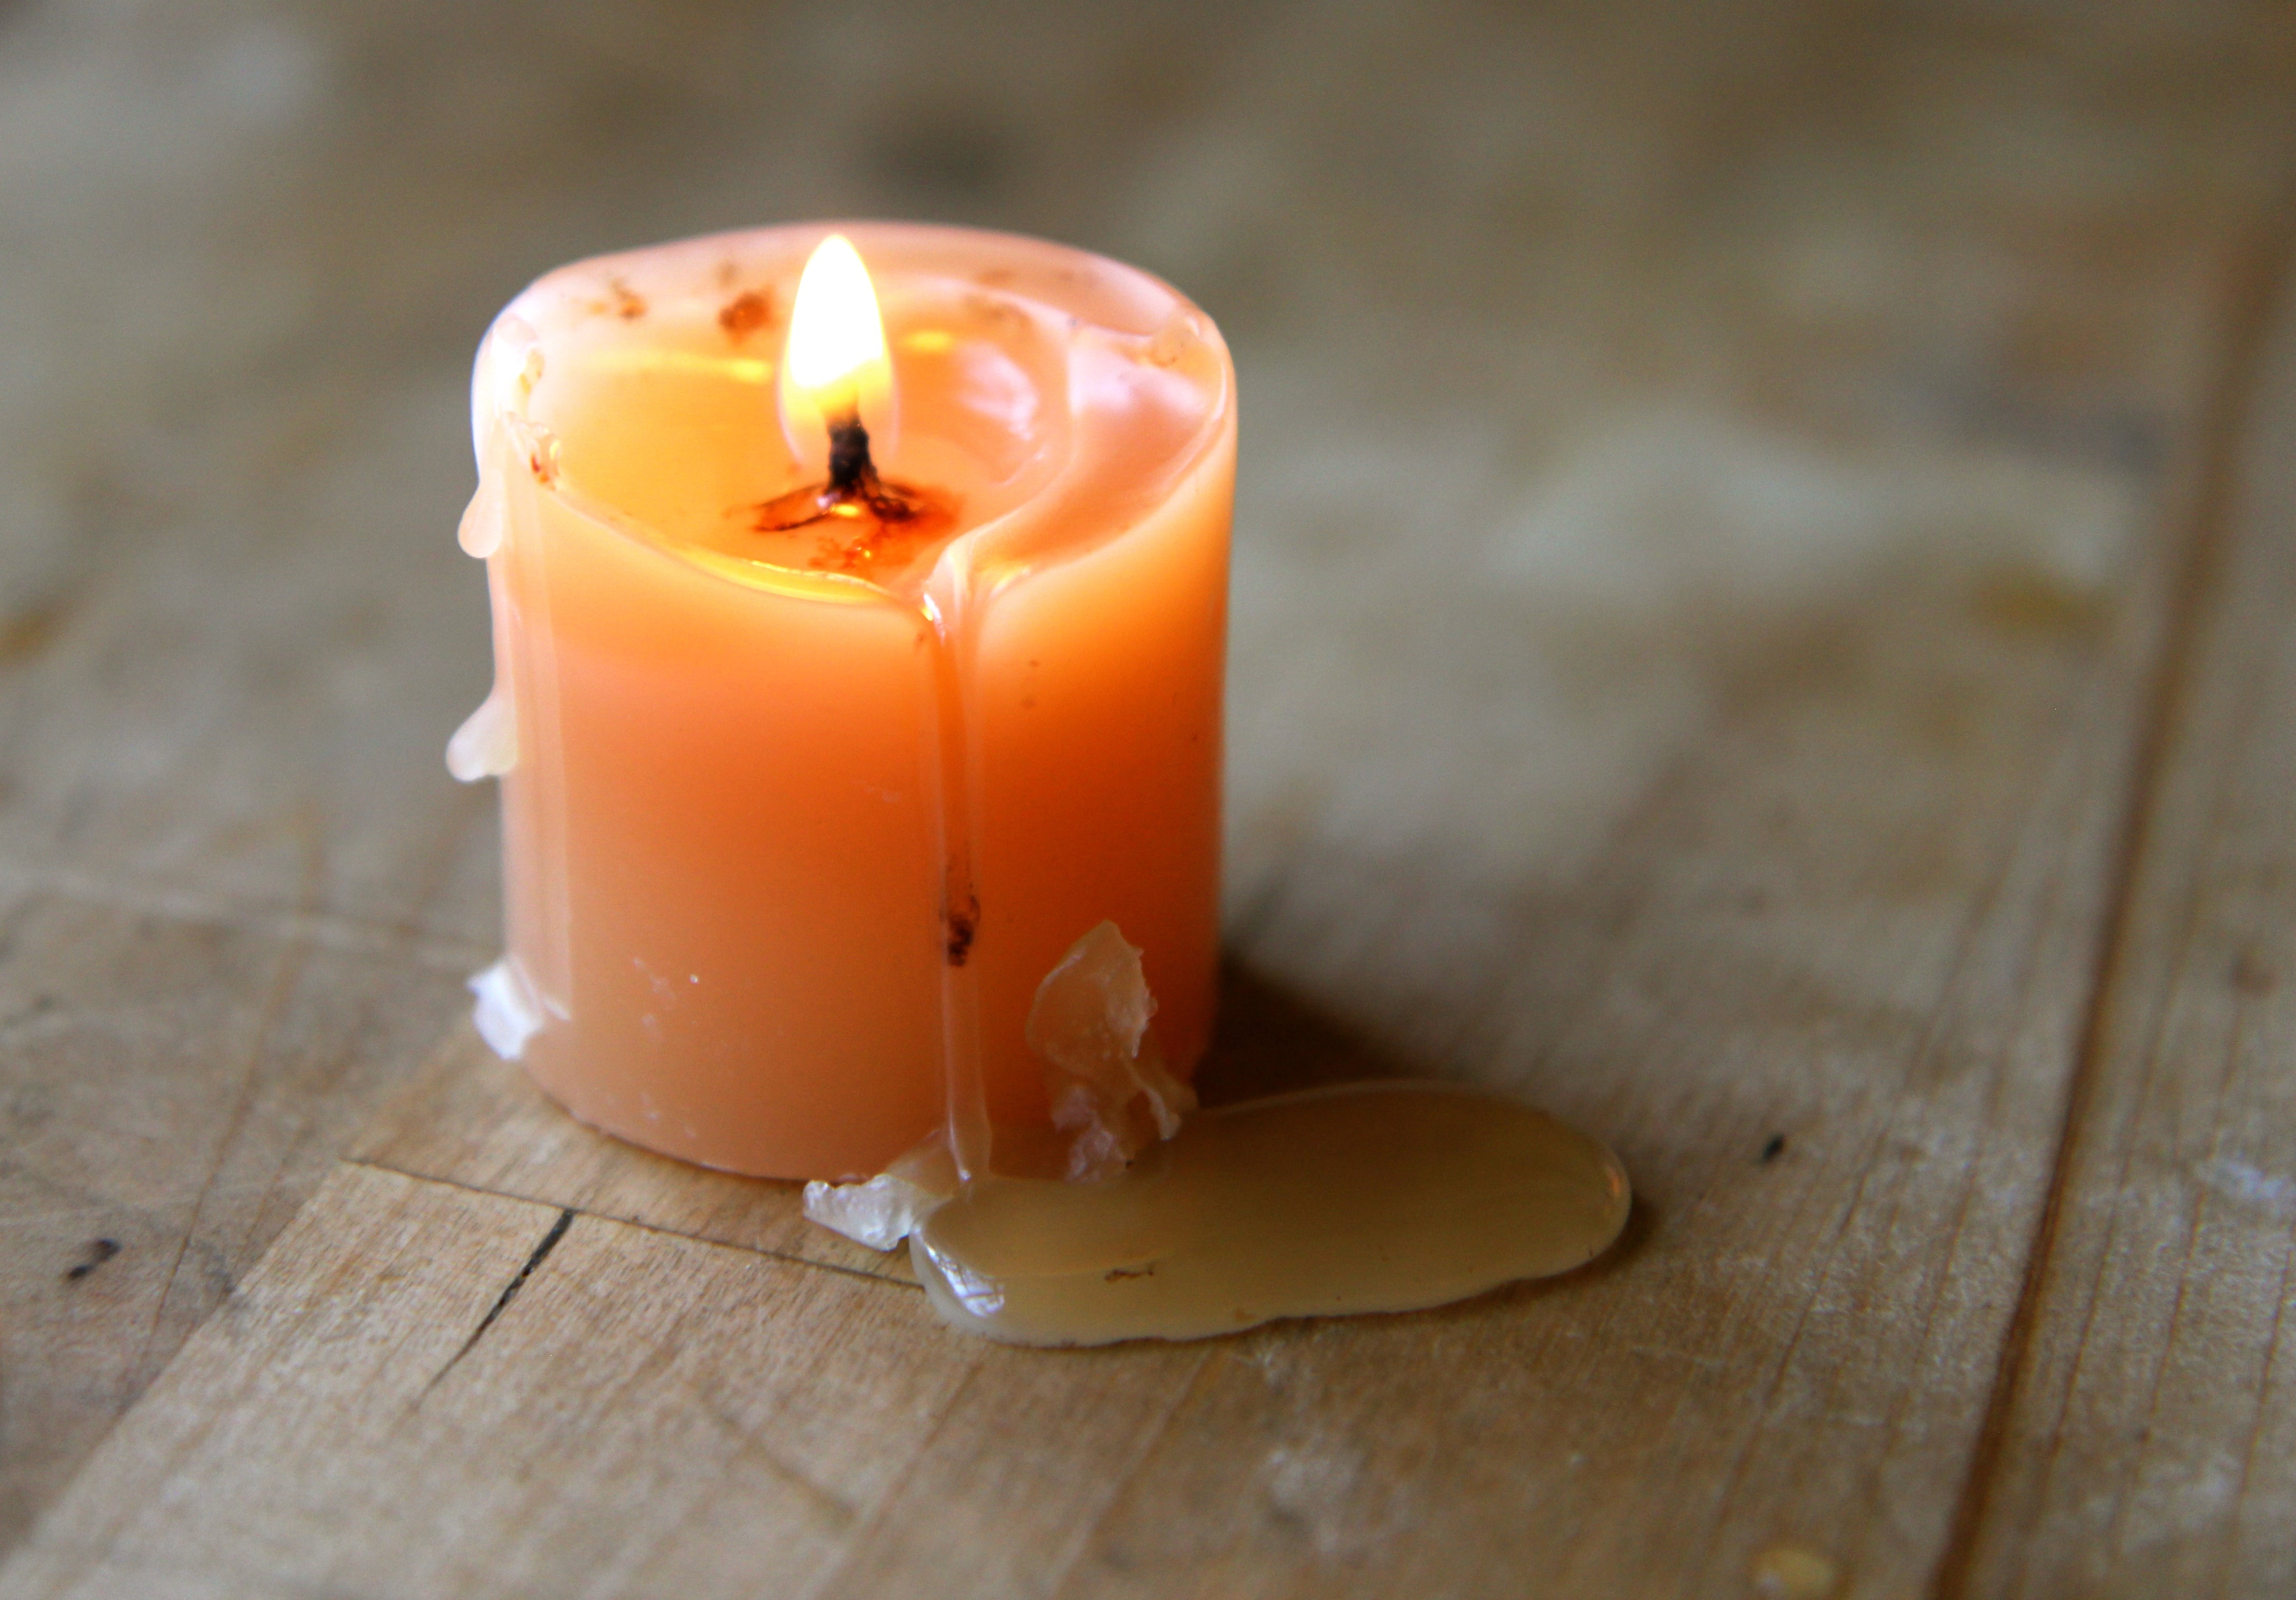 How Is Soy Wax Made? – Simple Scents by Simpleness Collection